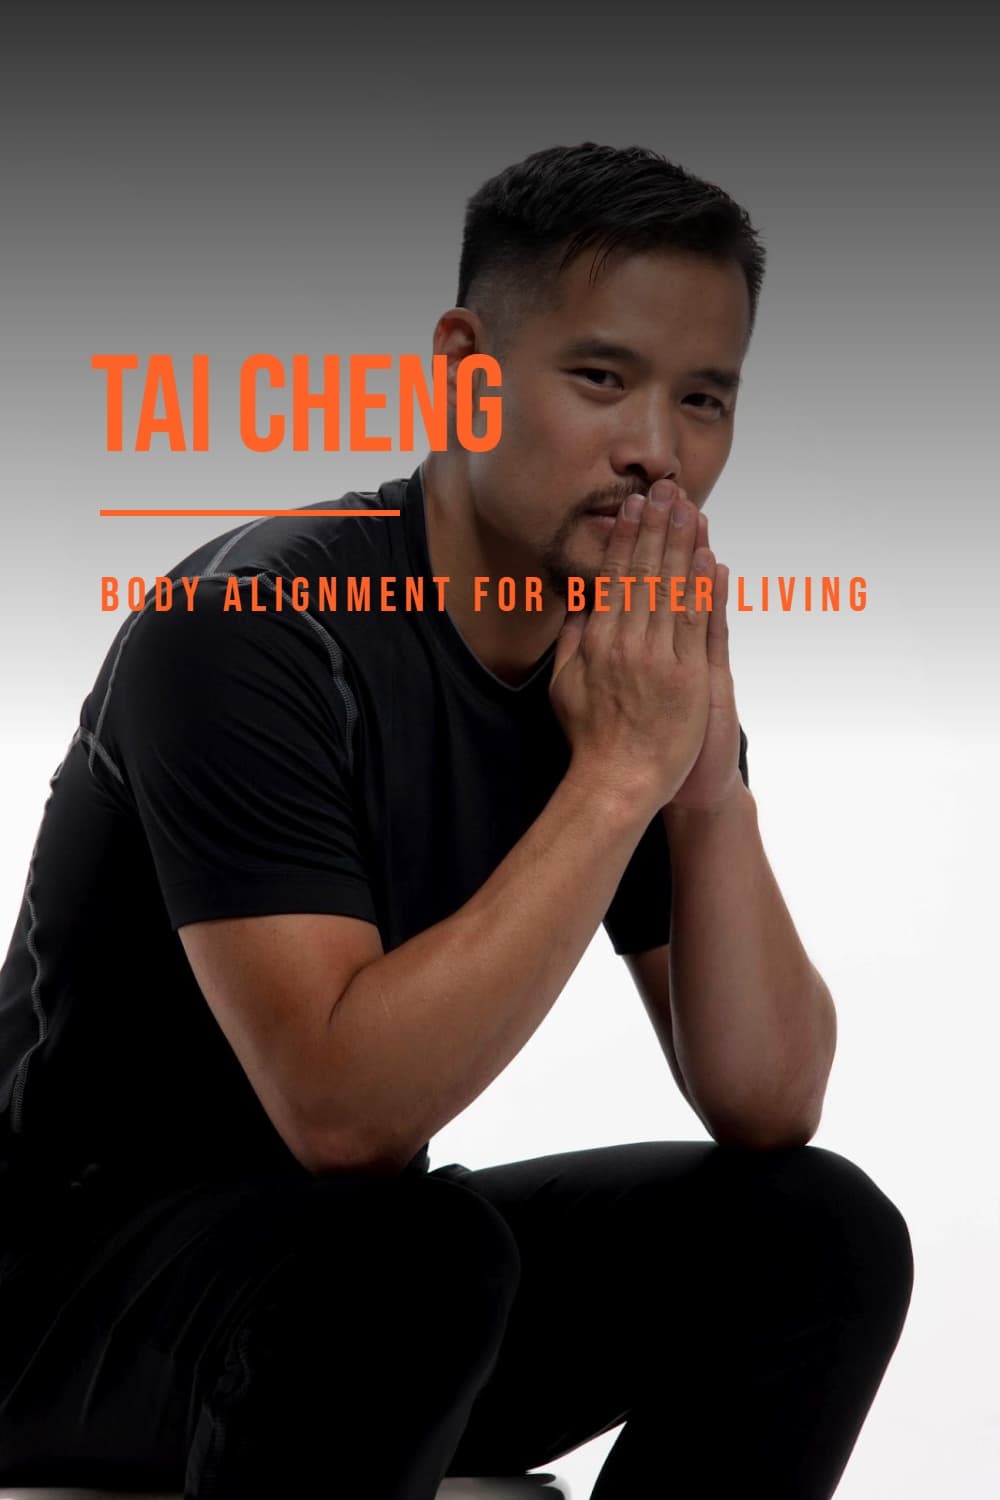 Tai Cheng - Body Alignment for Better Living